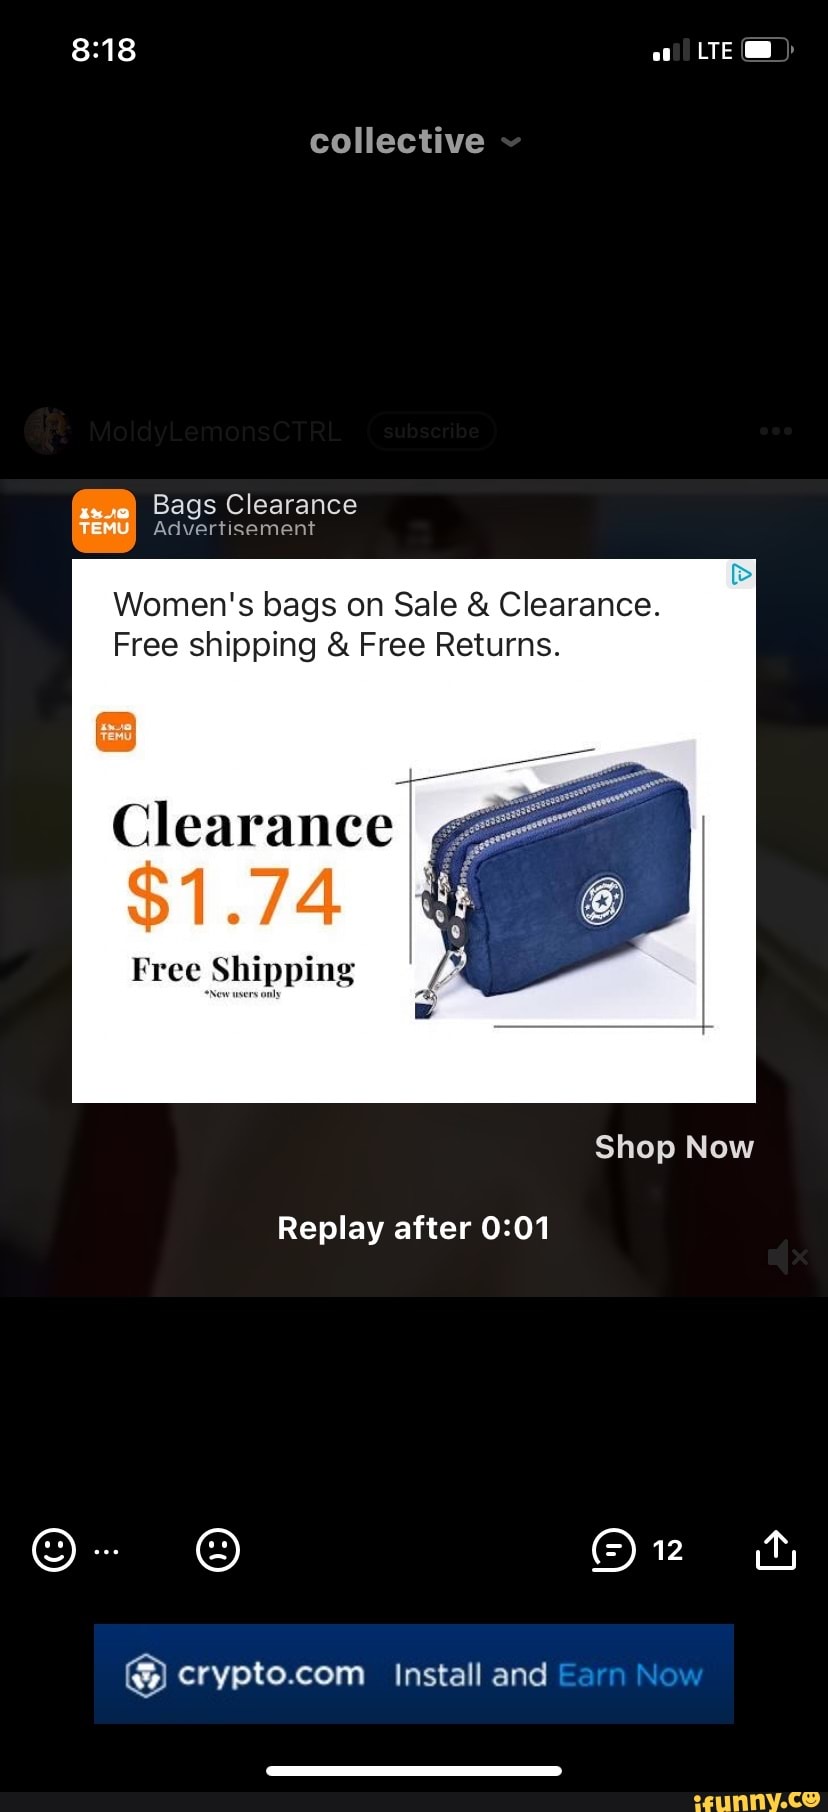 Collective Bags Clearance Advertisement Women's bags on Sale